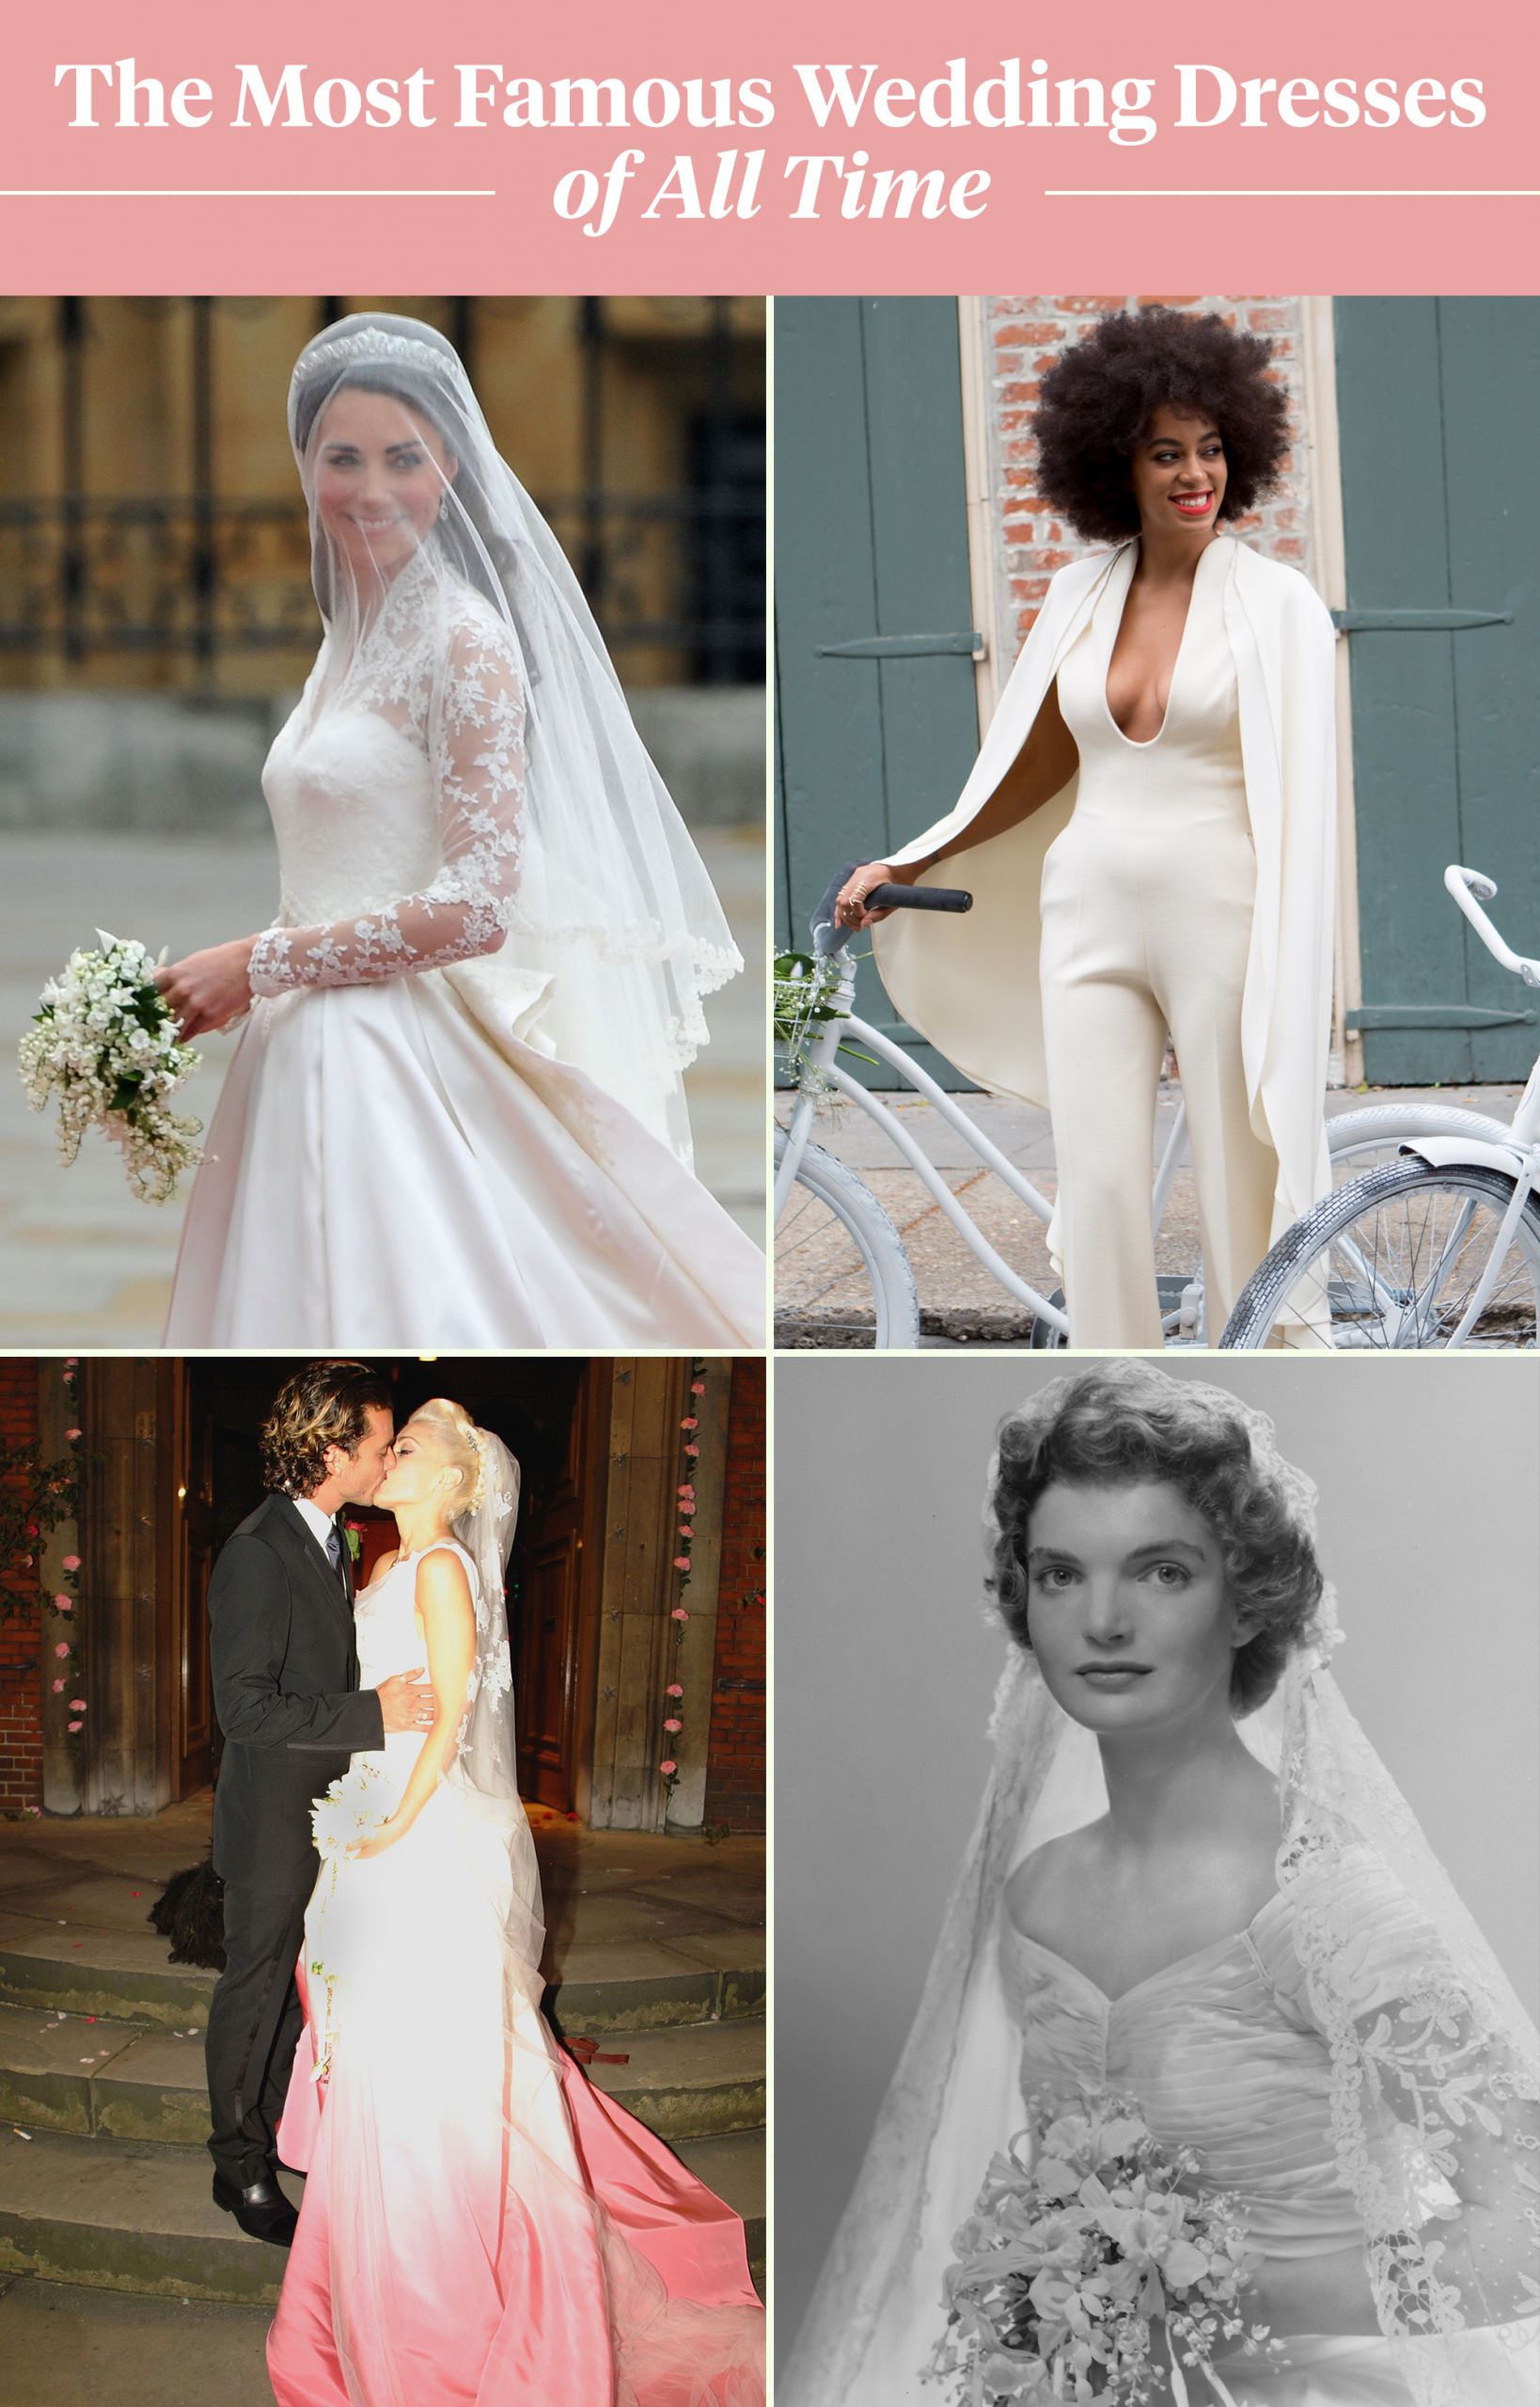 Famous Wedding Dresses
 See the 100 Most Famous Wedding Dresses of All Time in 1